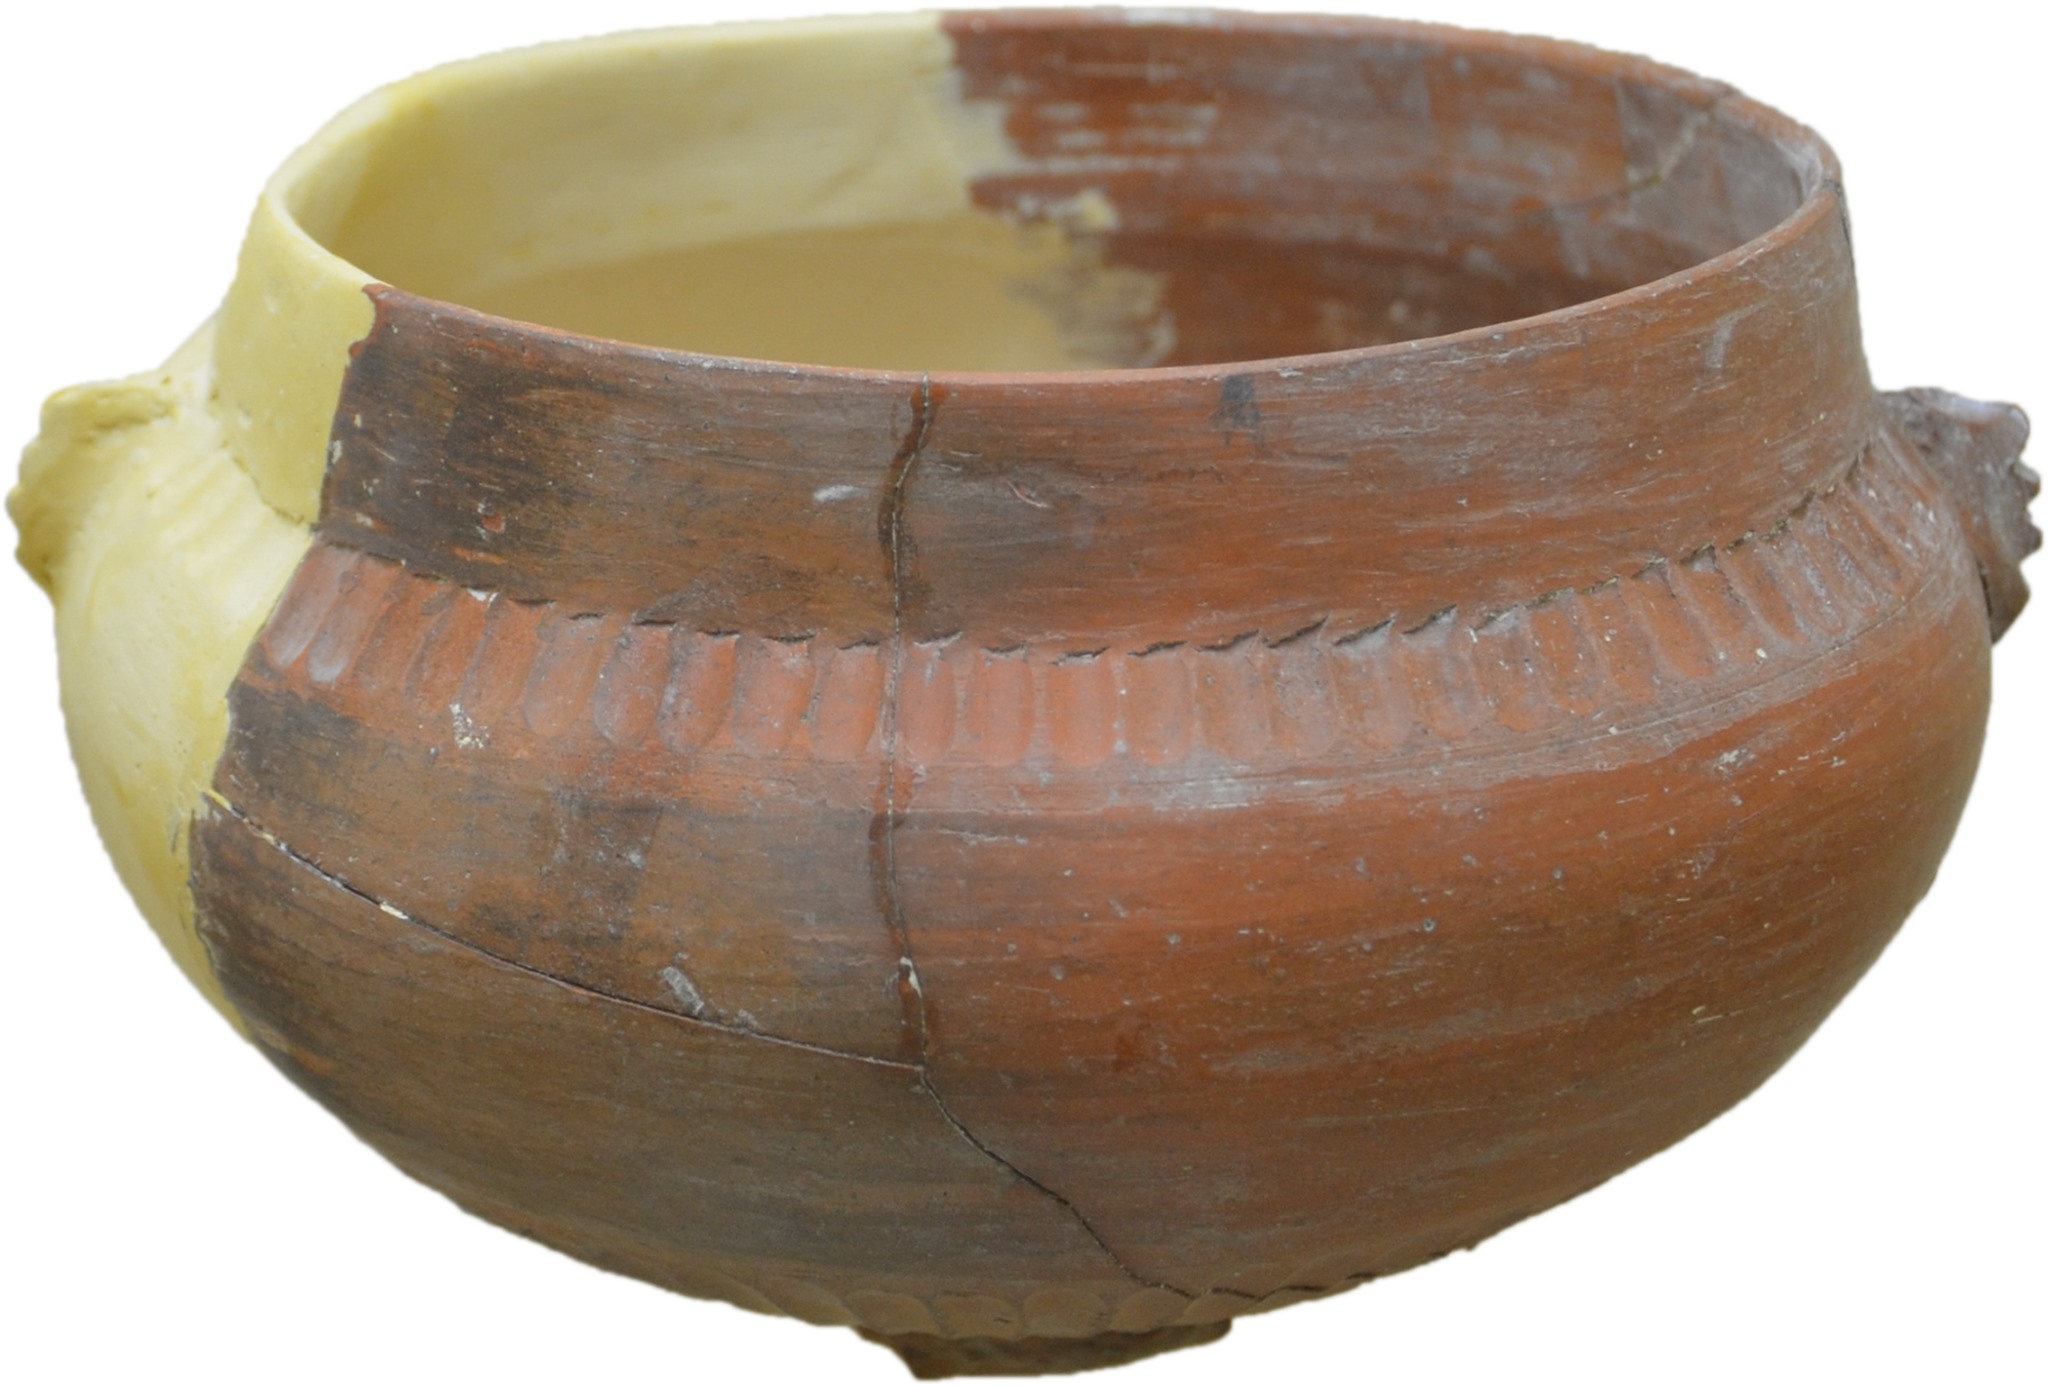 Manila Ware Pottery - The Ceramic Heritage of the Philippines